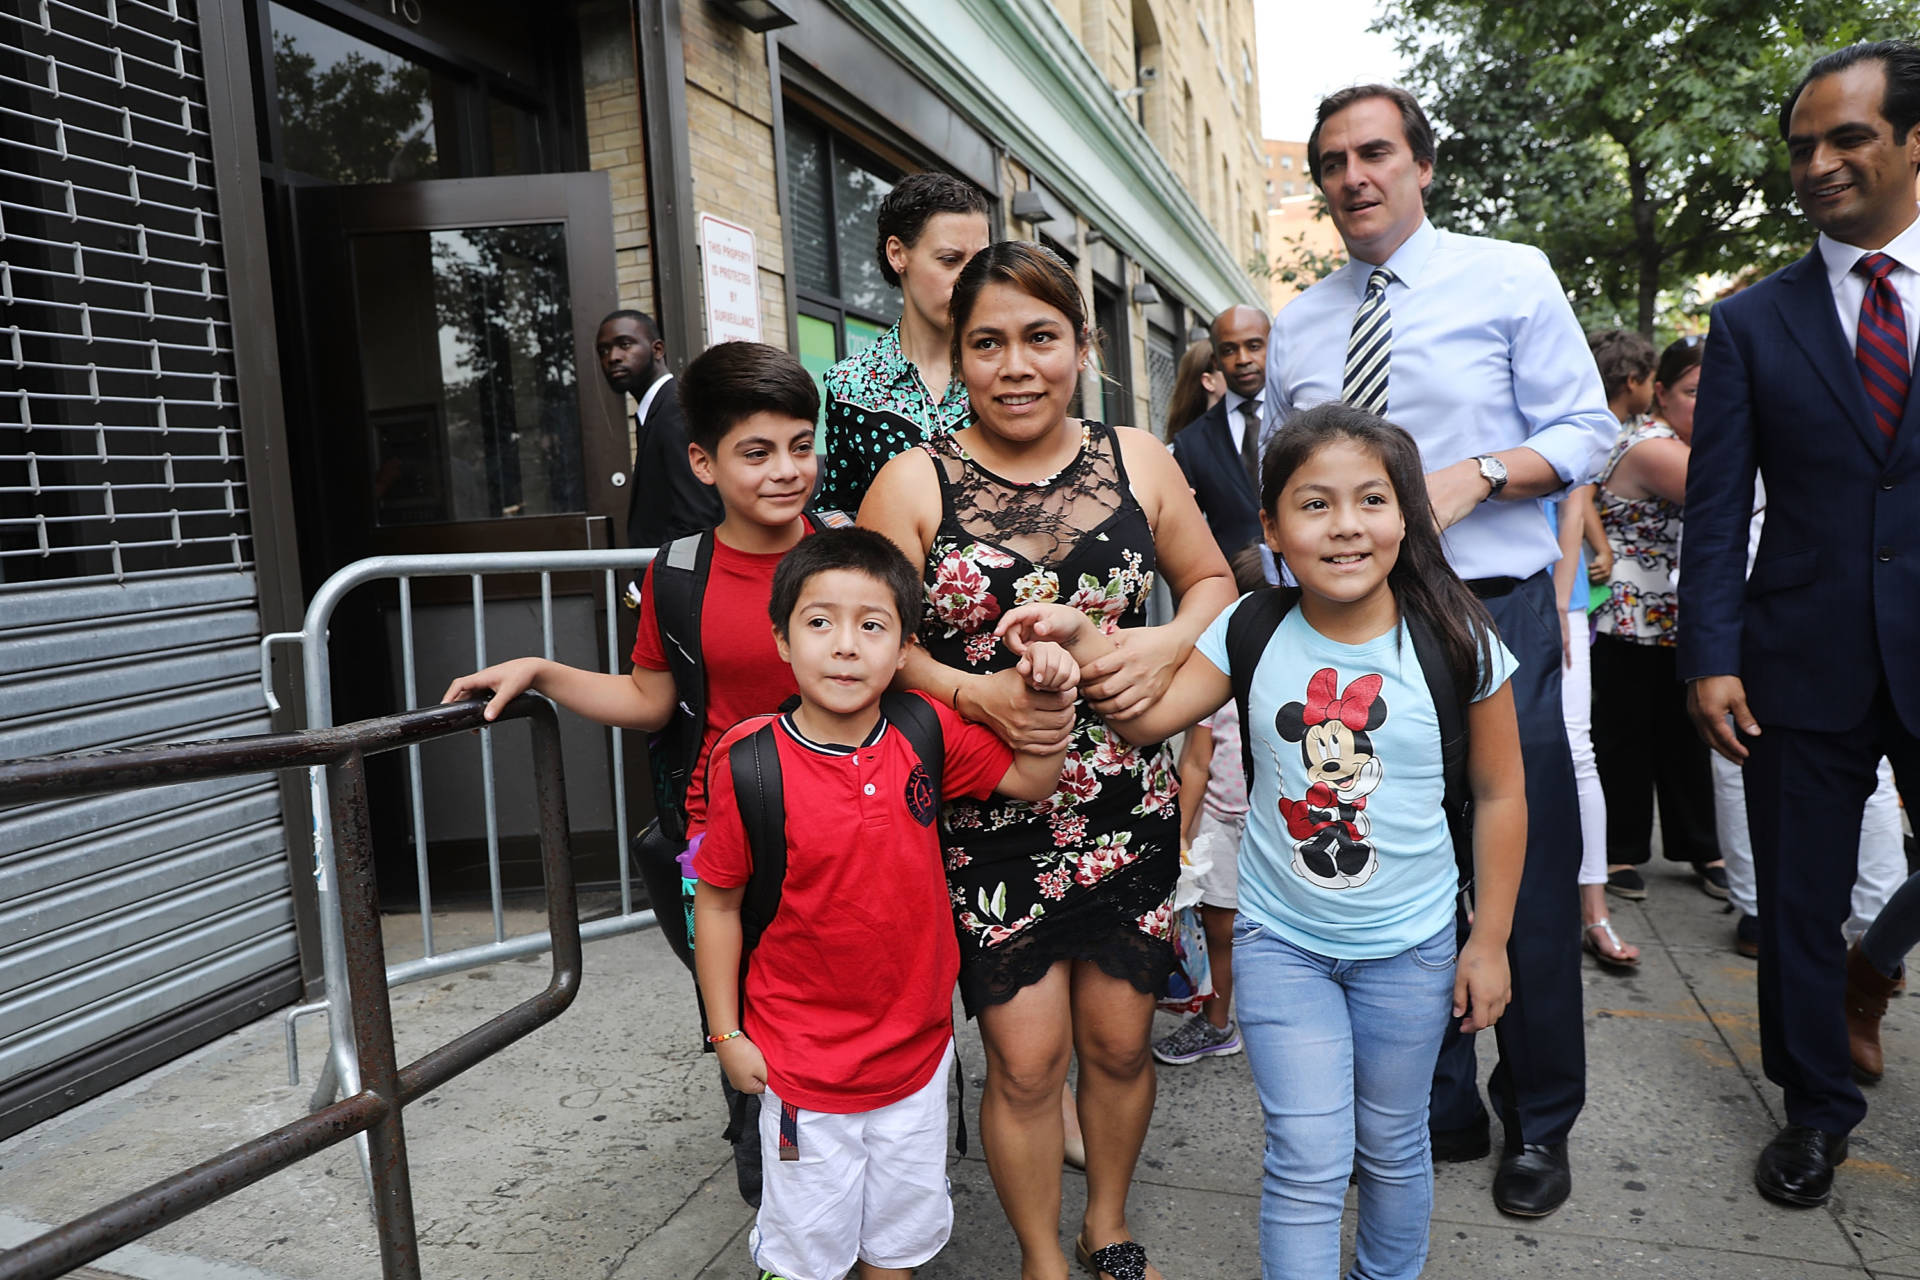 Yeni Maricela Gonzalez Garcia (center) stands with her children 6 year-old Deyuin (left), 9 year-old Jamelin (right) and 11 year-old Lester (back) as she and her lawyer speak with the news media after she was reunited with her children at the East Harlem Cayuga Centers on July 13, 2018 in New York City. Gonzalez Garcia, from Guatemala, drove cross-country to be reunited with her three children after they were taken from an Arizona immigration facility over eight weeks ago. Gonzalez Garcia crossed over the U.S. border with her three children on May 19, only two days before they were taken from her as part of President Donald Trump's controversial zero-tolerance policy of removing immigrant children from their parents after they are detained. Spencer Platt/Getty Images